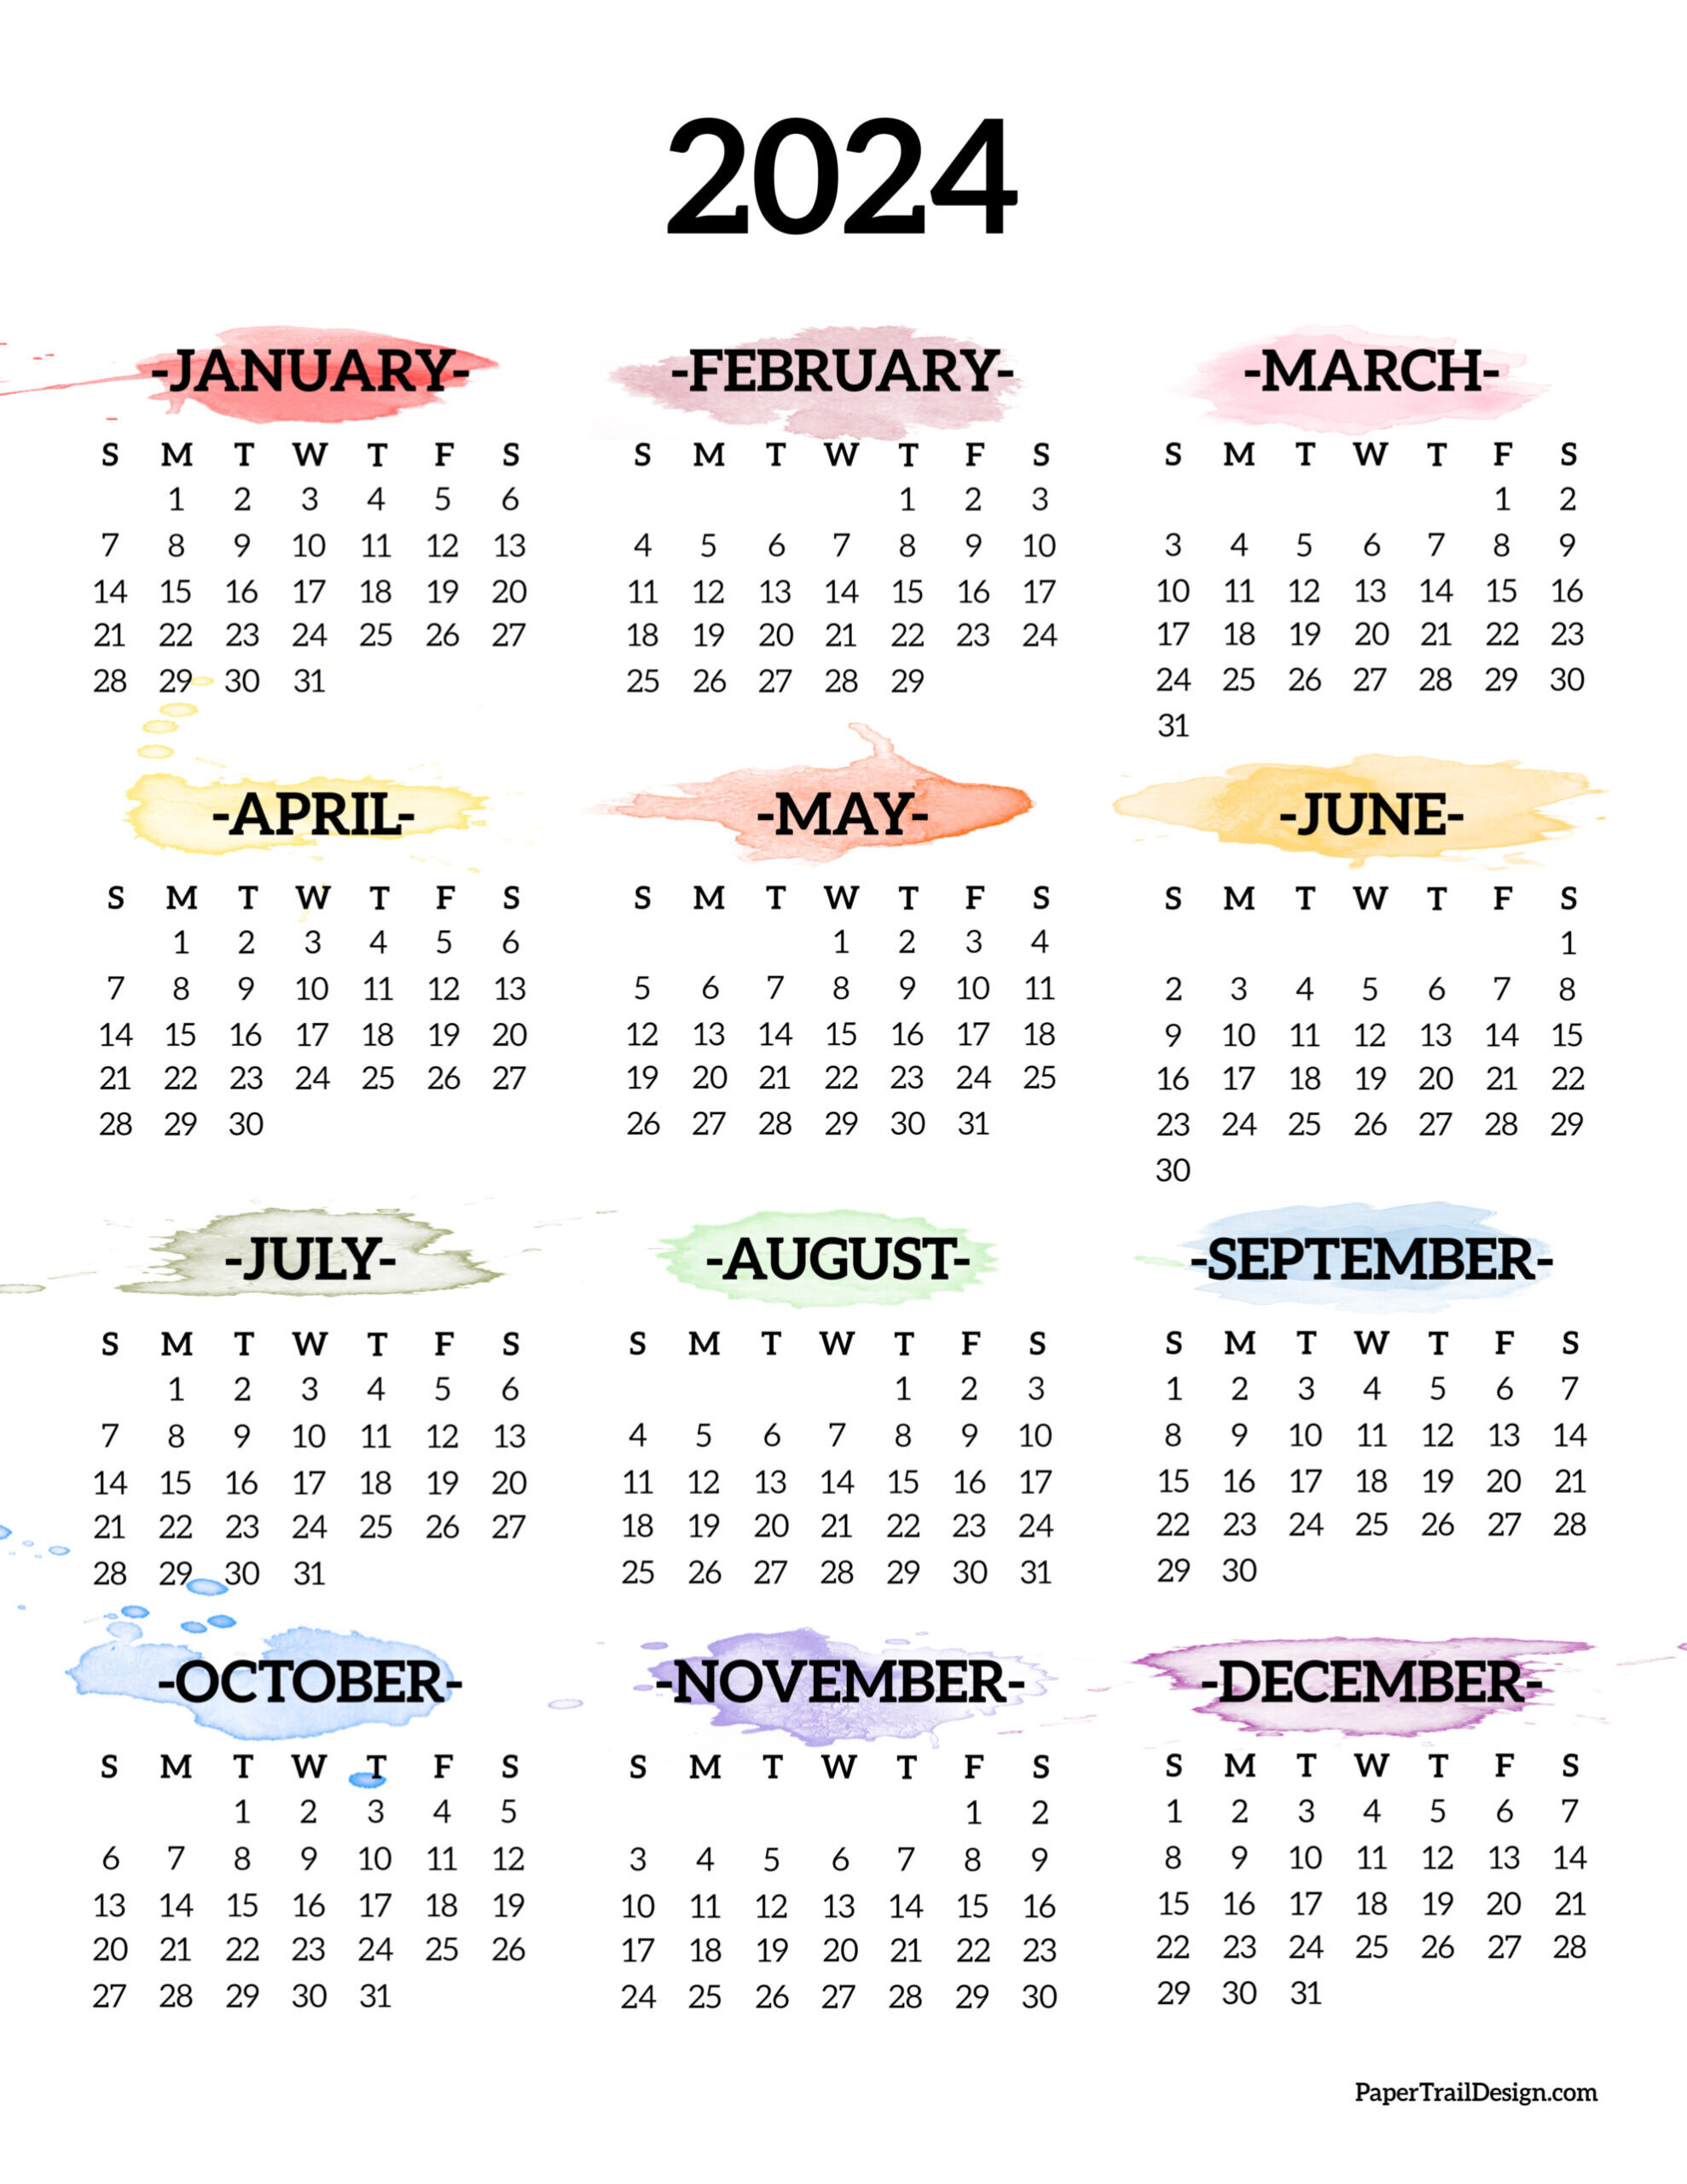 Calendar 2024 Printable One Page - Paper Trail Design for 2024 Calendar Printable Free One Page